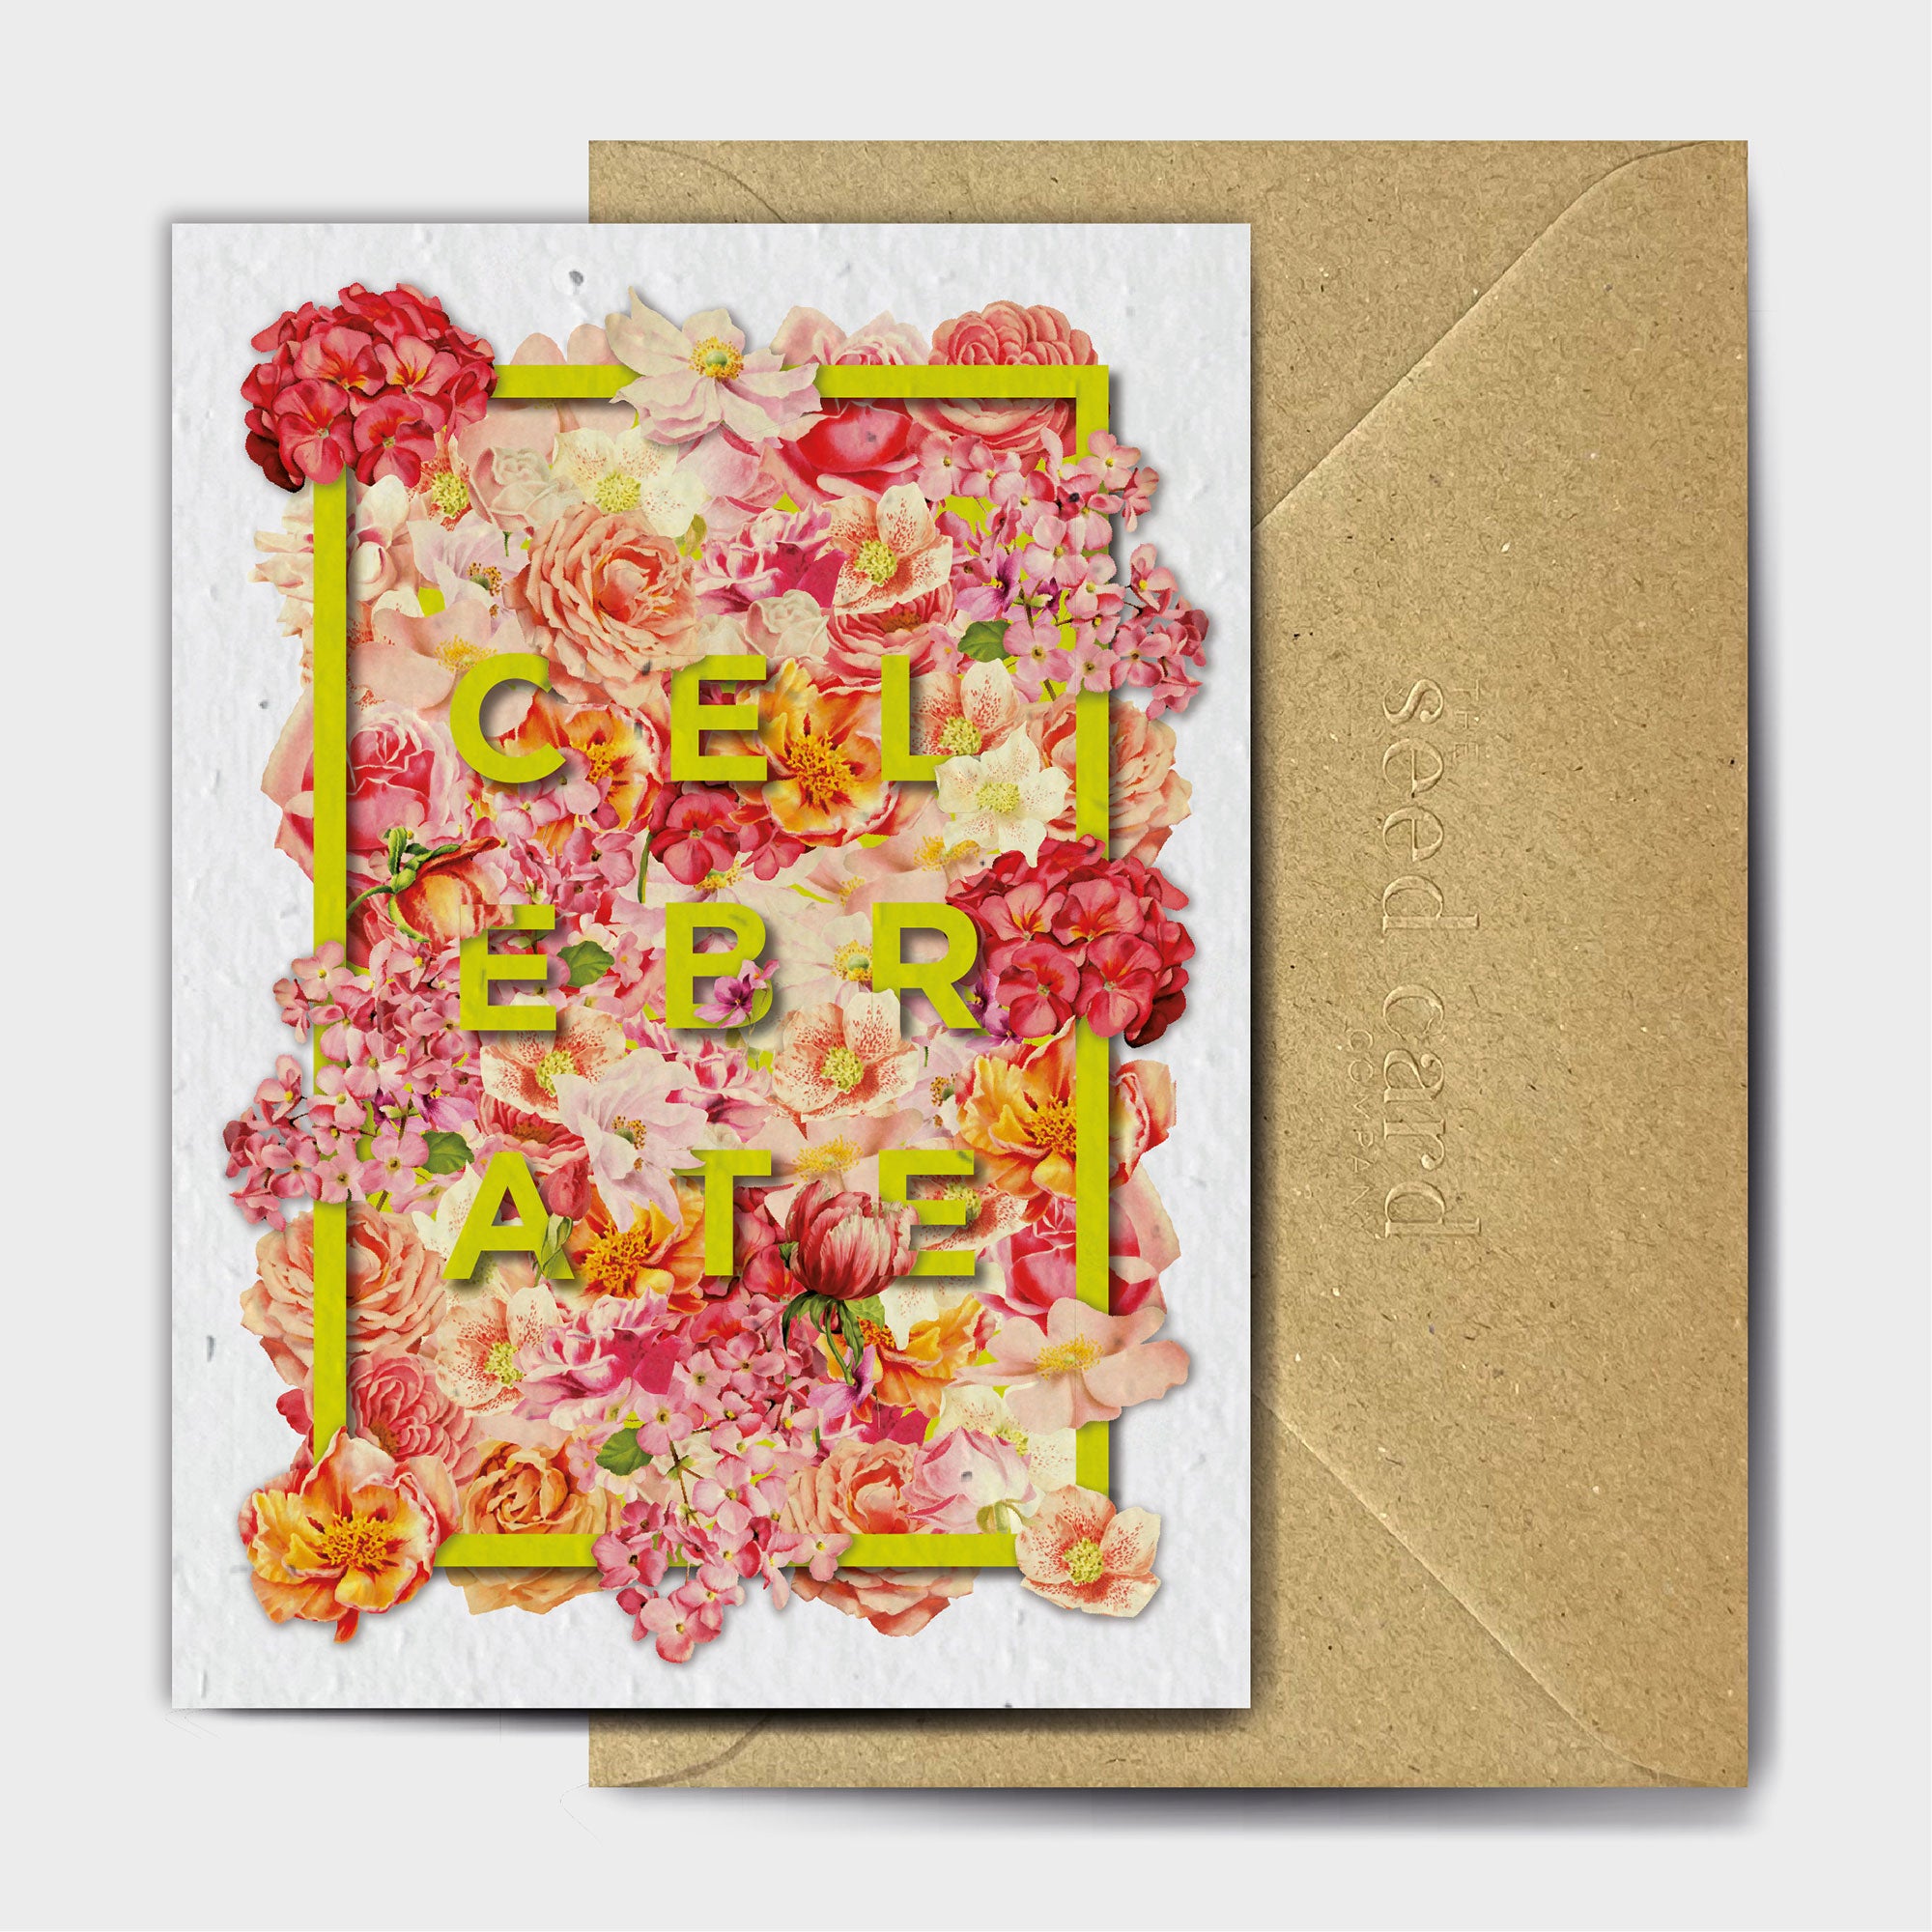 Shop online Summer Celebrations - 100% biodegradable seed-embedded cards Shop -The Seed Card Company